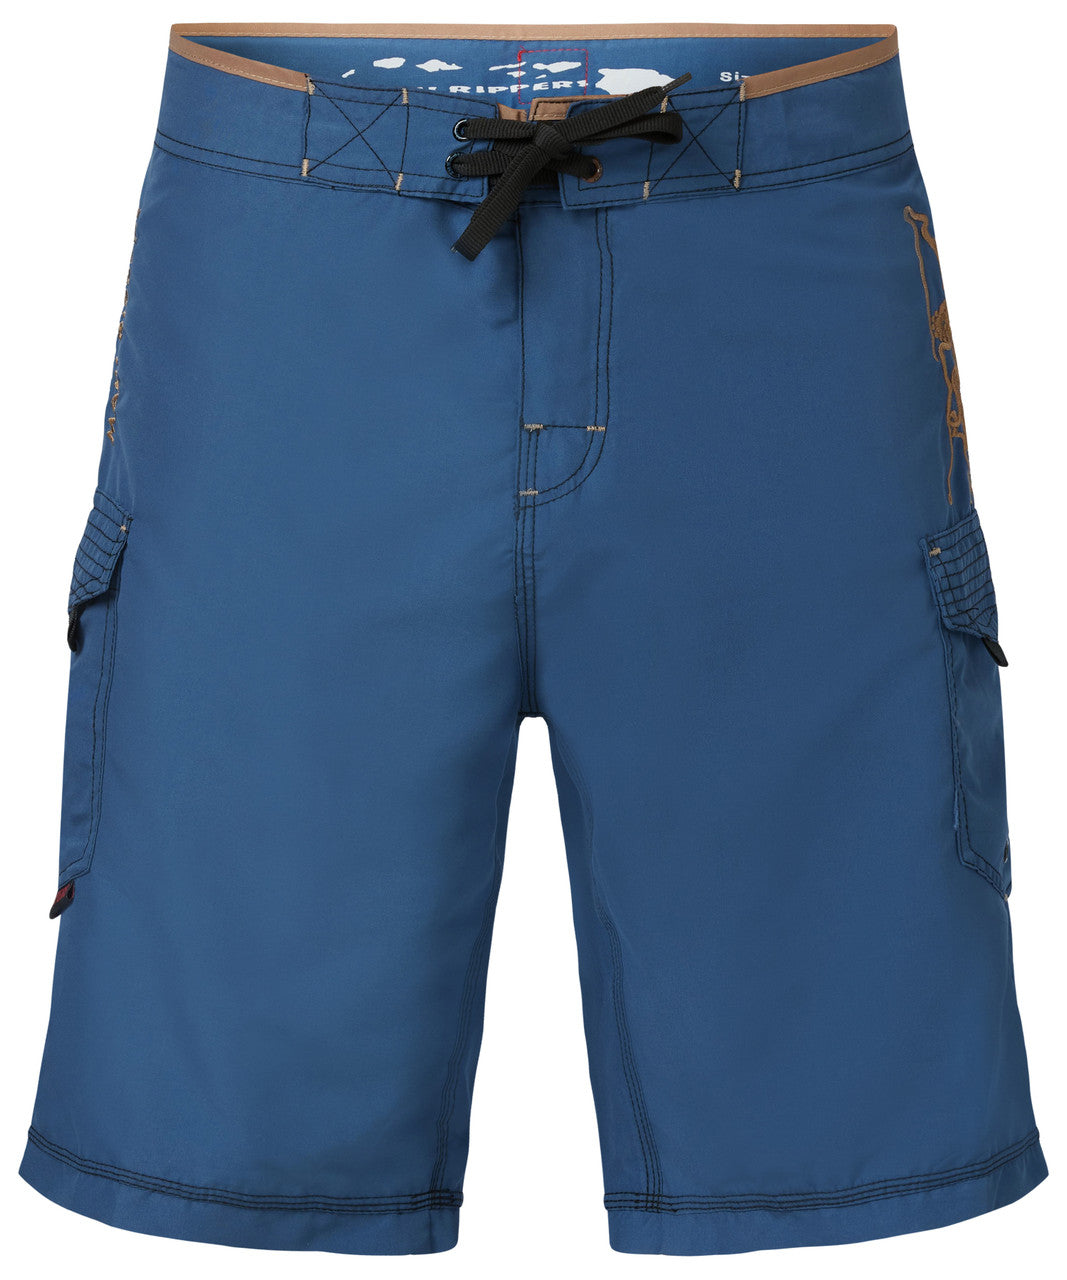 Party Pants Dino Ripper Boardshorts - buy at Blue Tomato